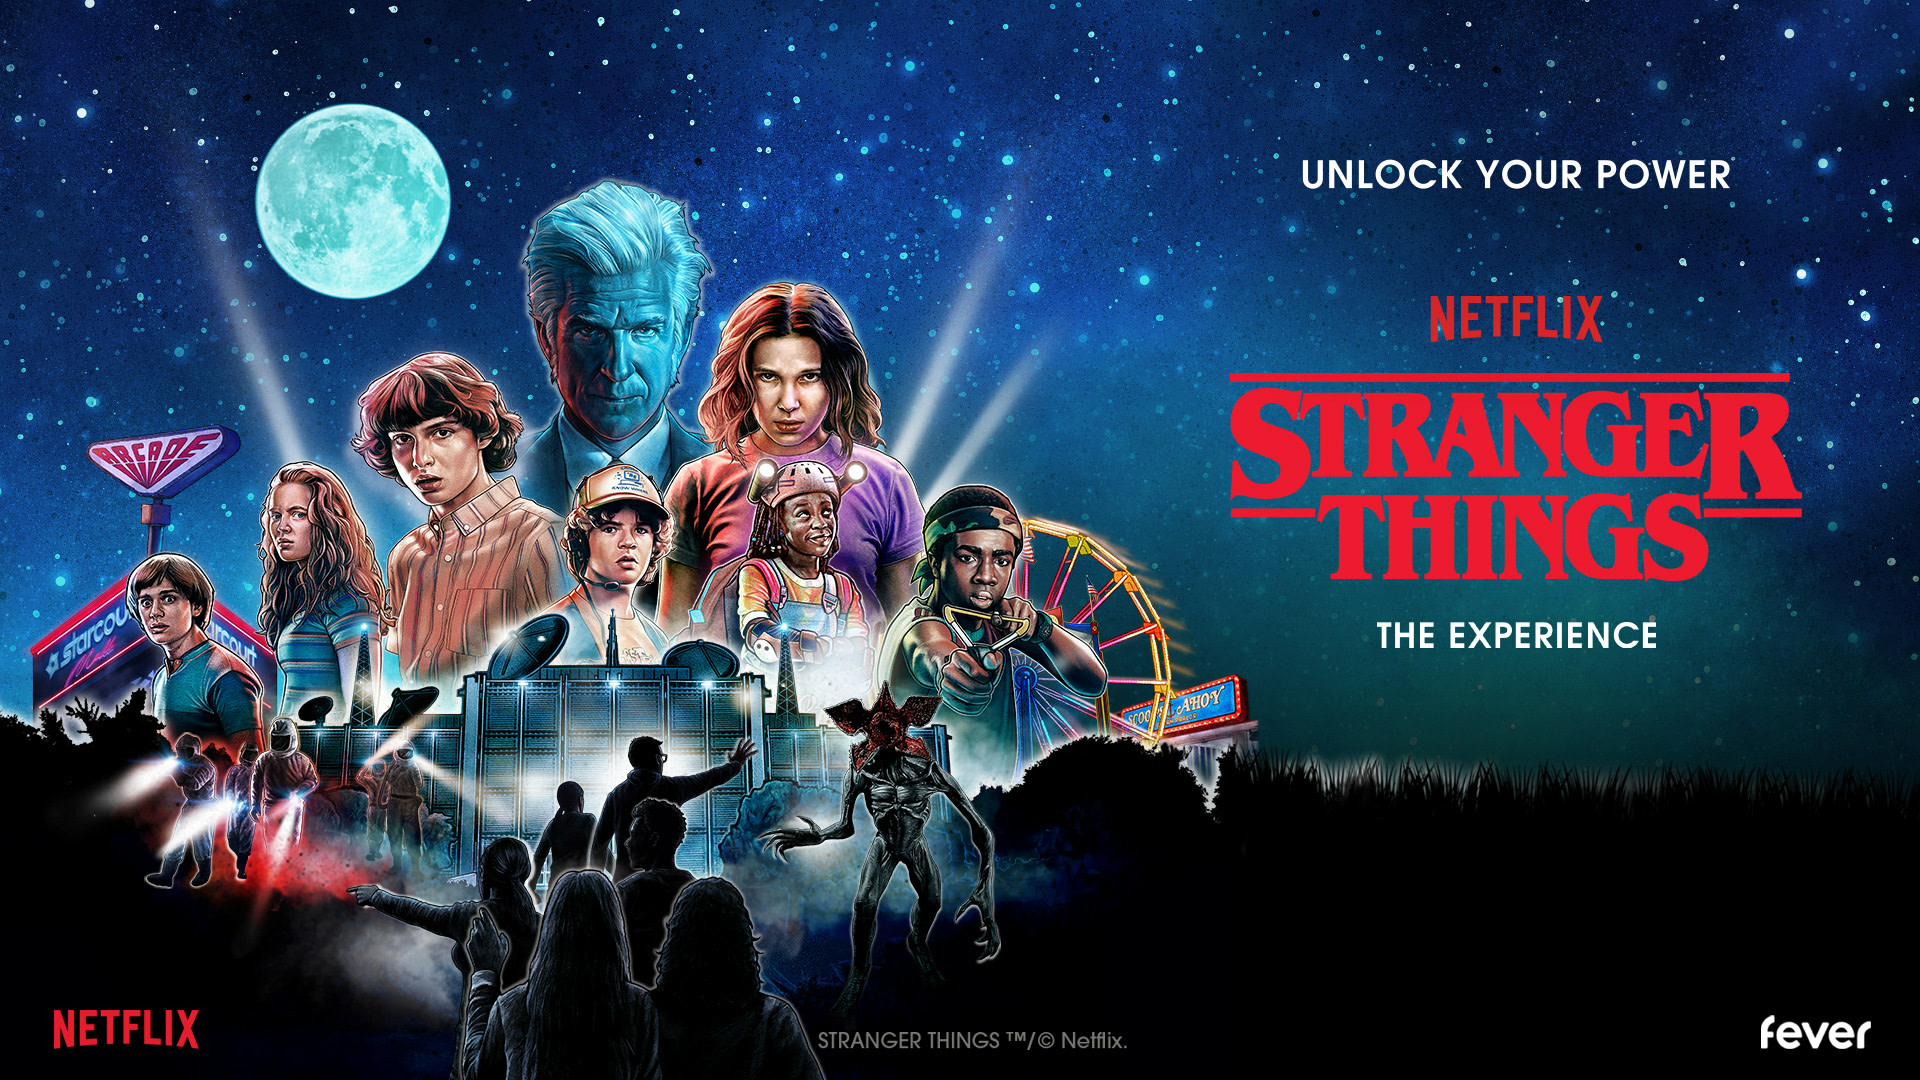 3840x Stranger Things Hd Netflix Experience 3840x Resolution Wallpaper Hd Tv Series 4k Wallpapers Images Photos And Background Wallpapers Den